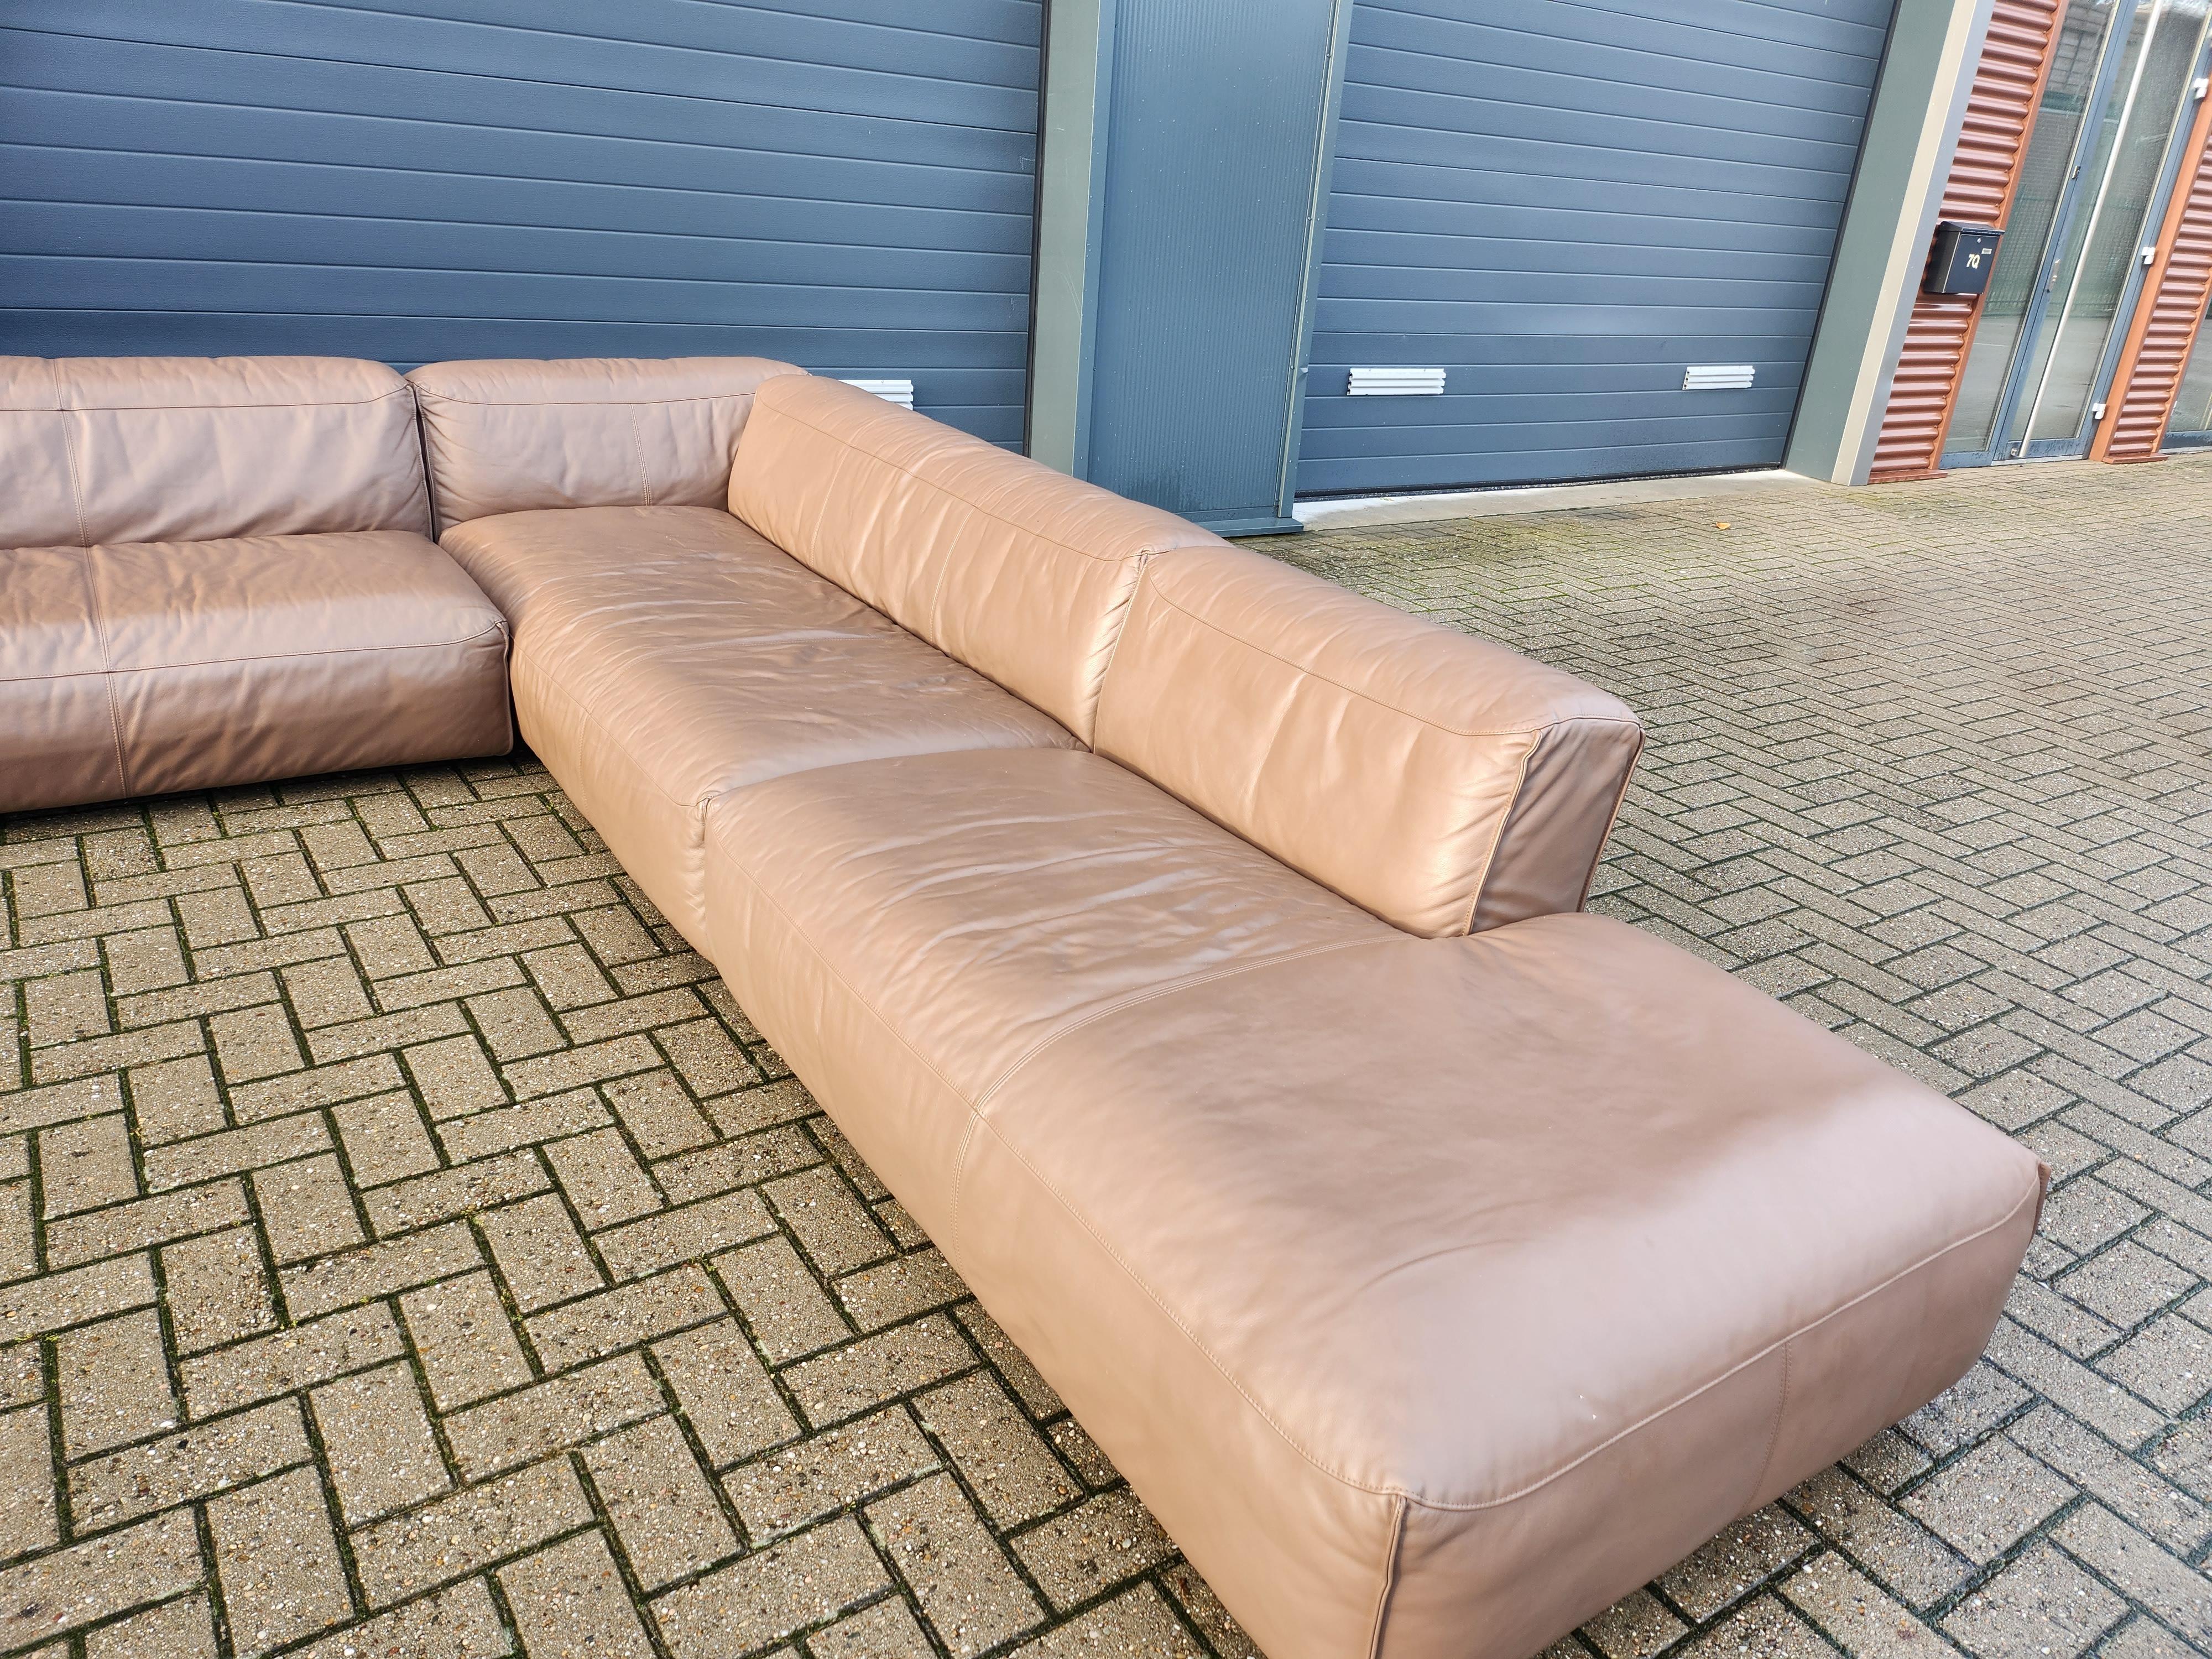 The sofa is still in good and undamaged condition, there are signs of use such as light seatingspots on the seats.

Information about Rolf Benz

Rolf Benz is a household name in the world of high-quality furniture and is synonymous with 